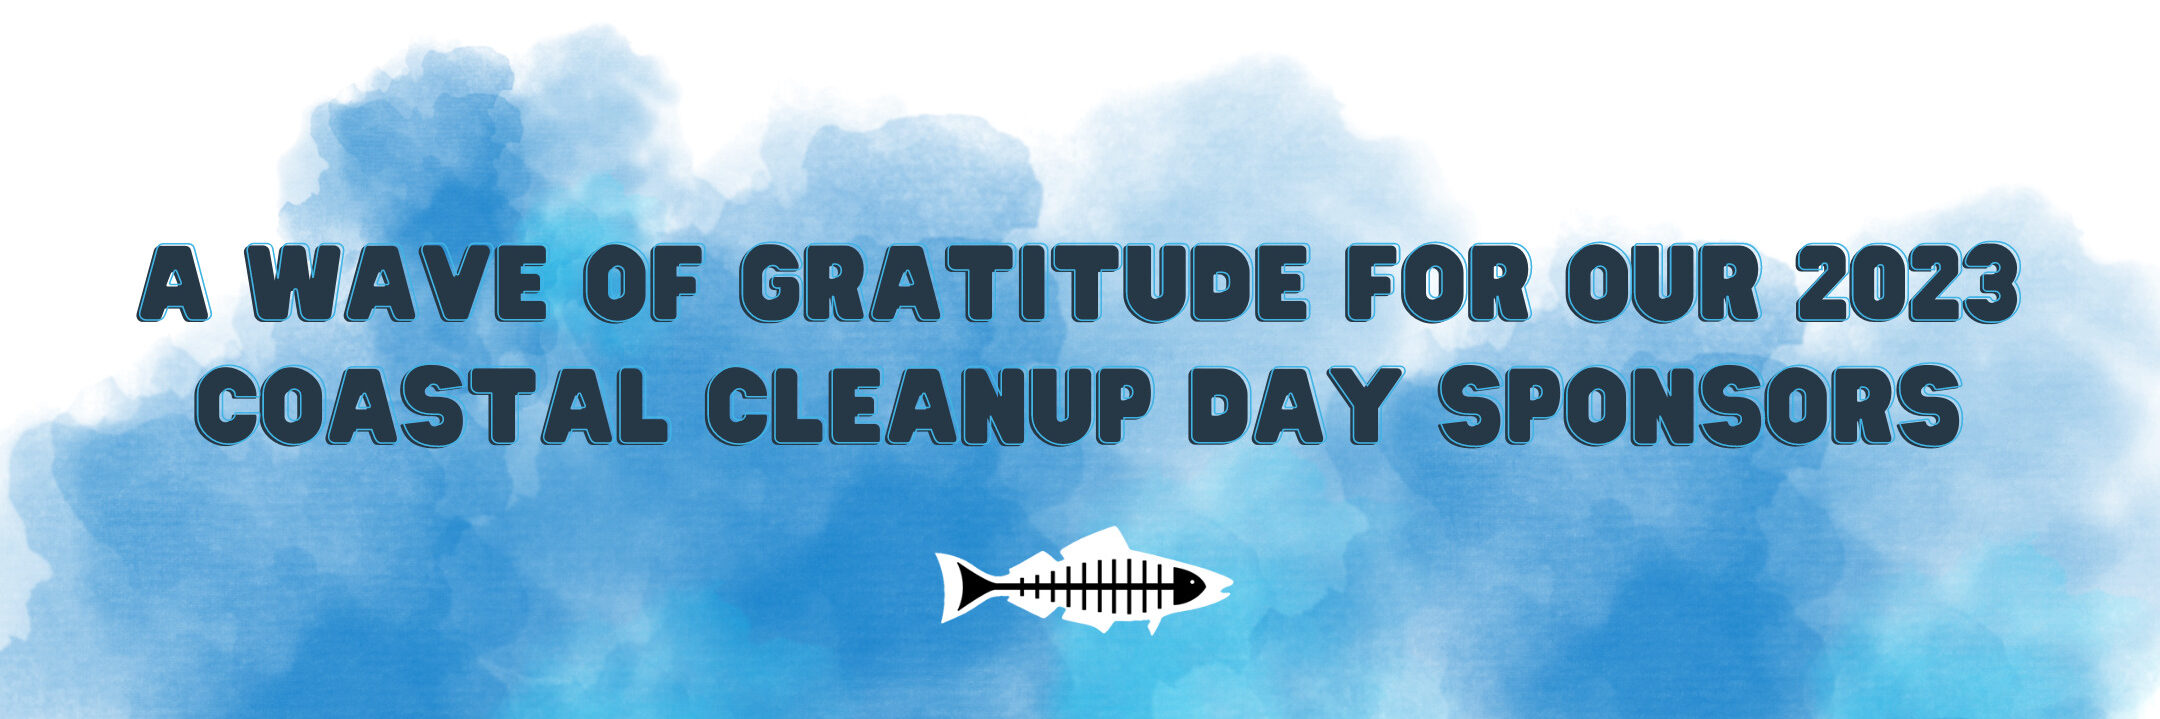 A Wave of gratitude for our 2023 Coastal Cleanup Day Sponsors